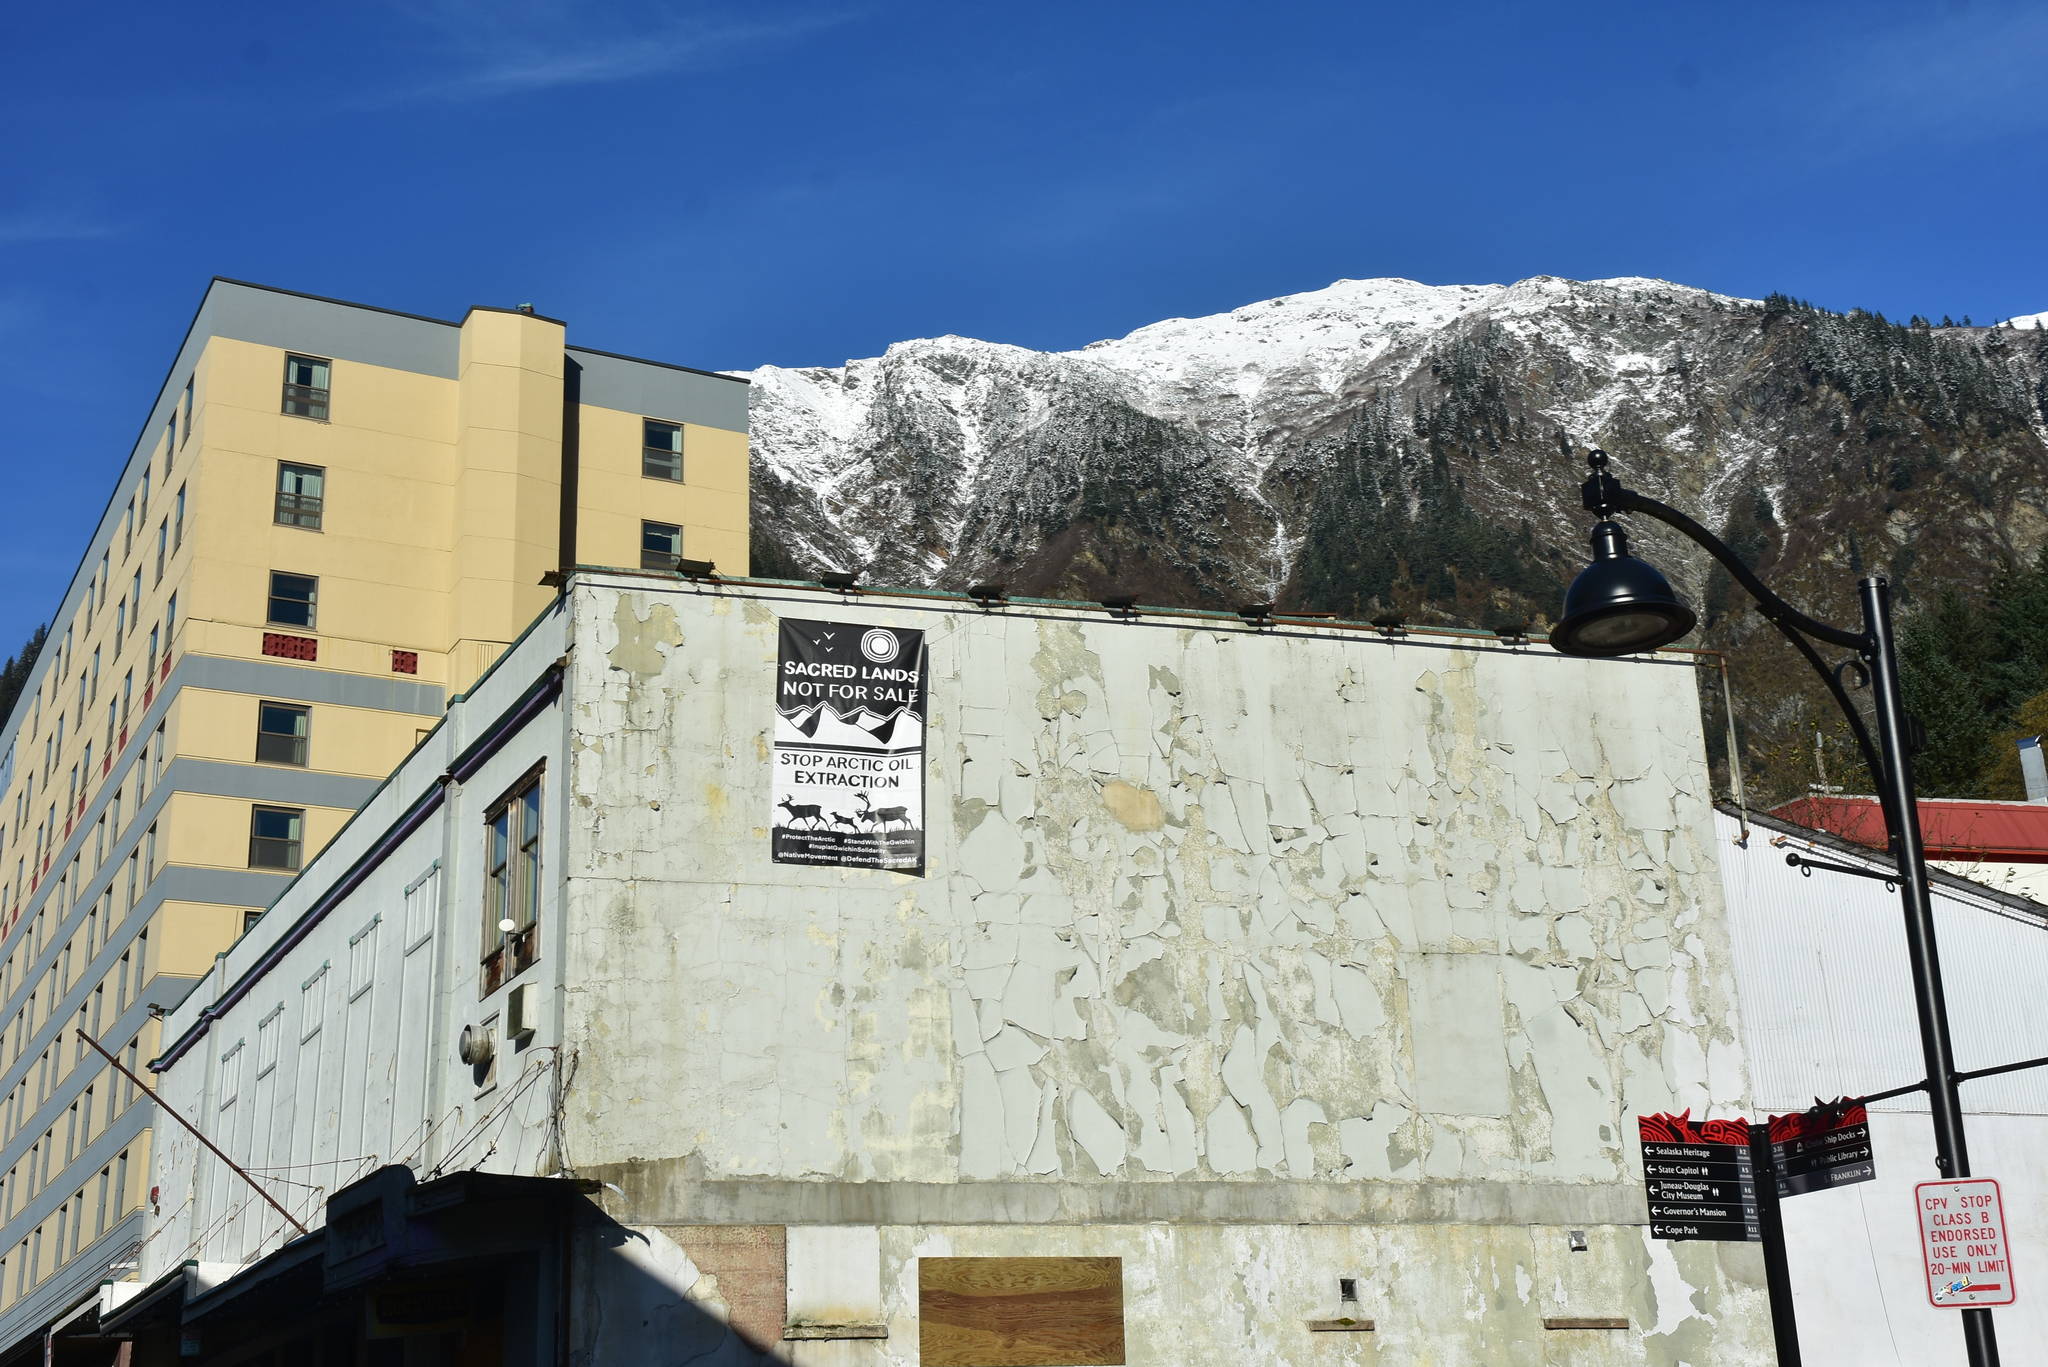 A banner protesting resource extraction in the Arctic was hung from a building in downtown Juneau on Wednesday, Oct. 21, 2020. Similar banners were hung in cities around the state and nation, part of a protest mounted by Alaska Native activists. (Peter Segall / Juneau Empire)